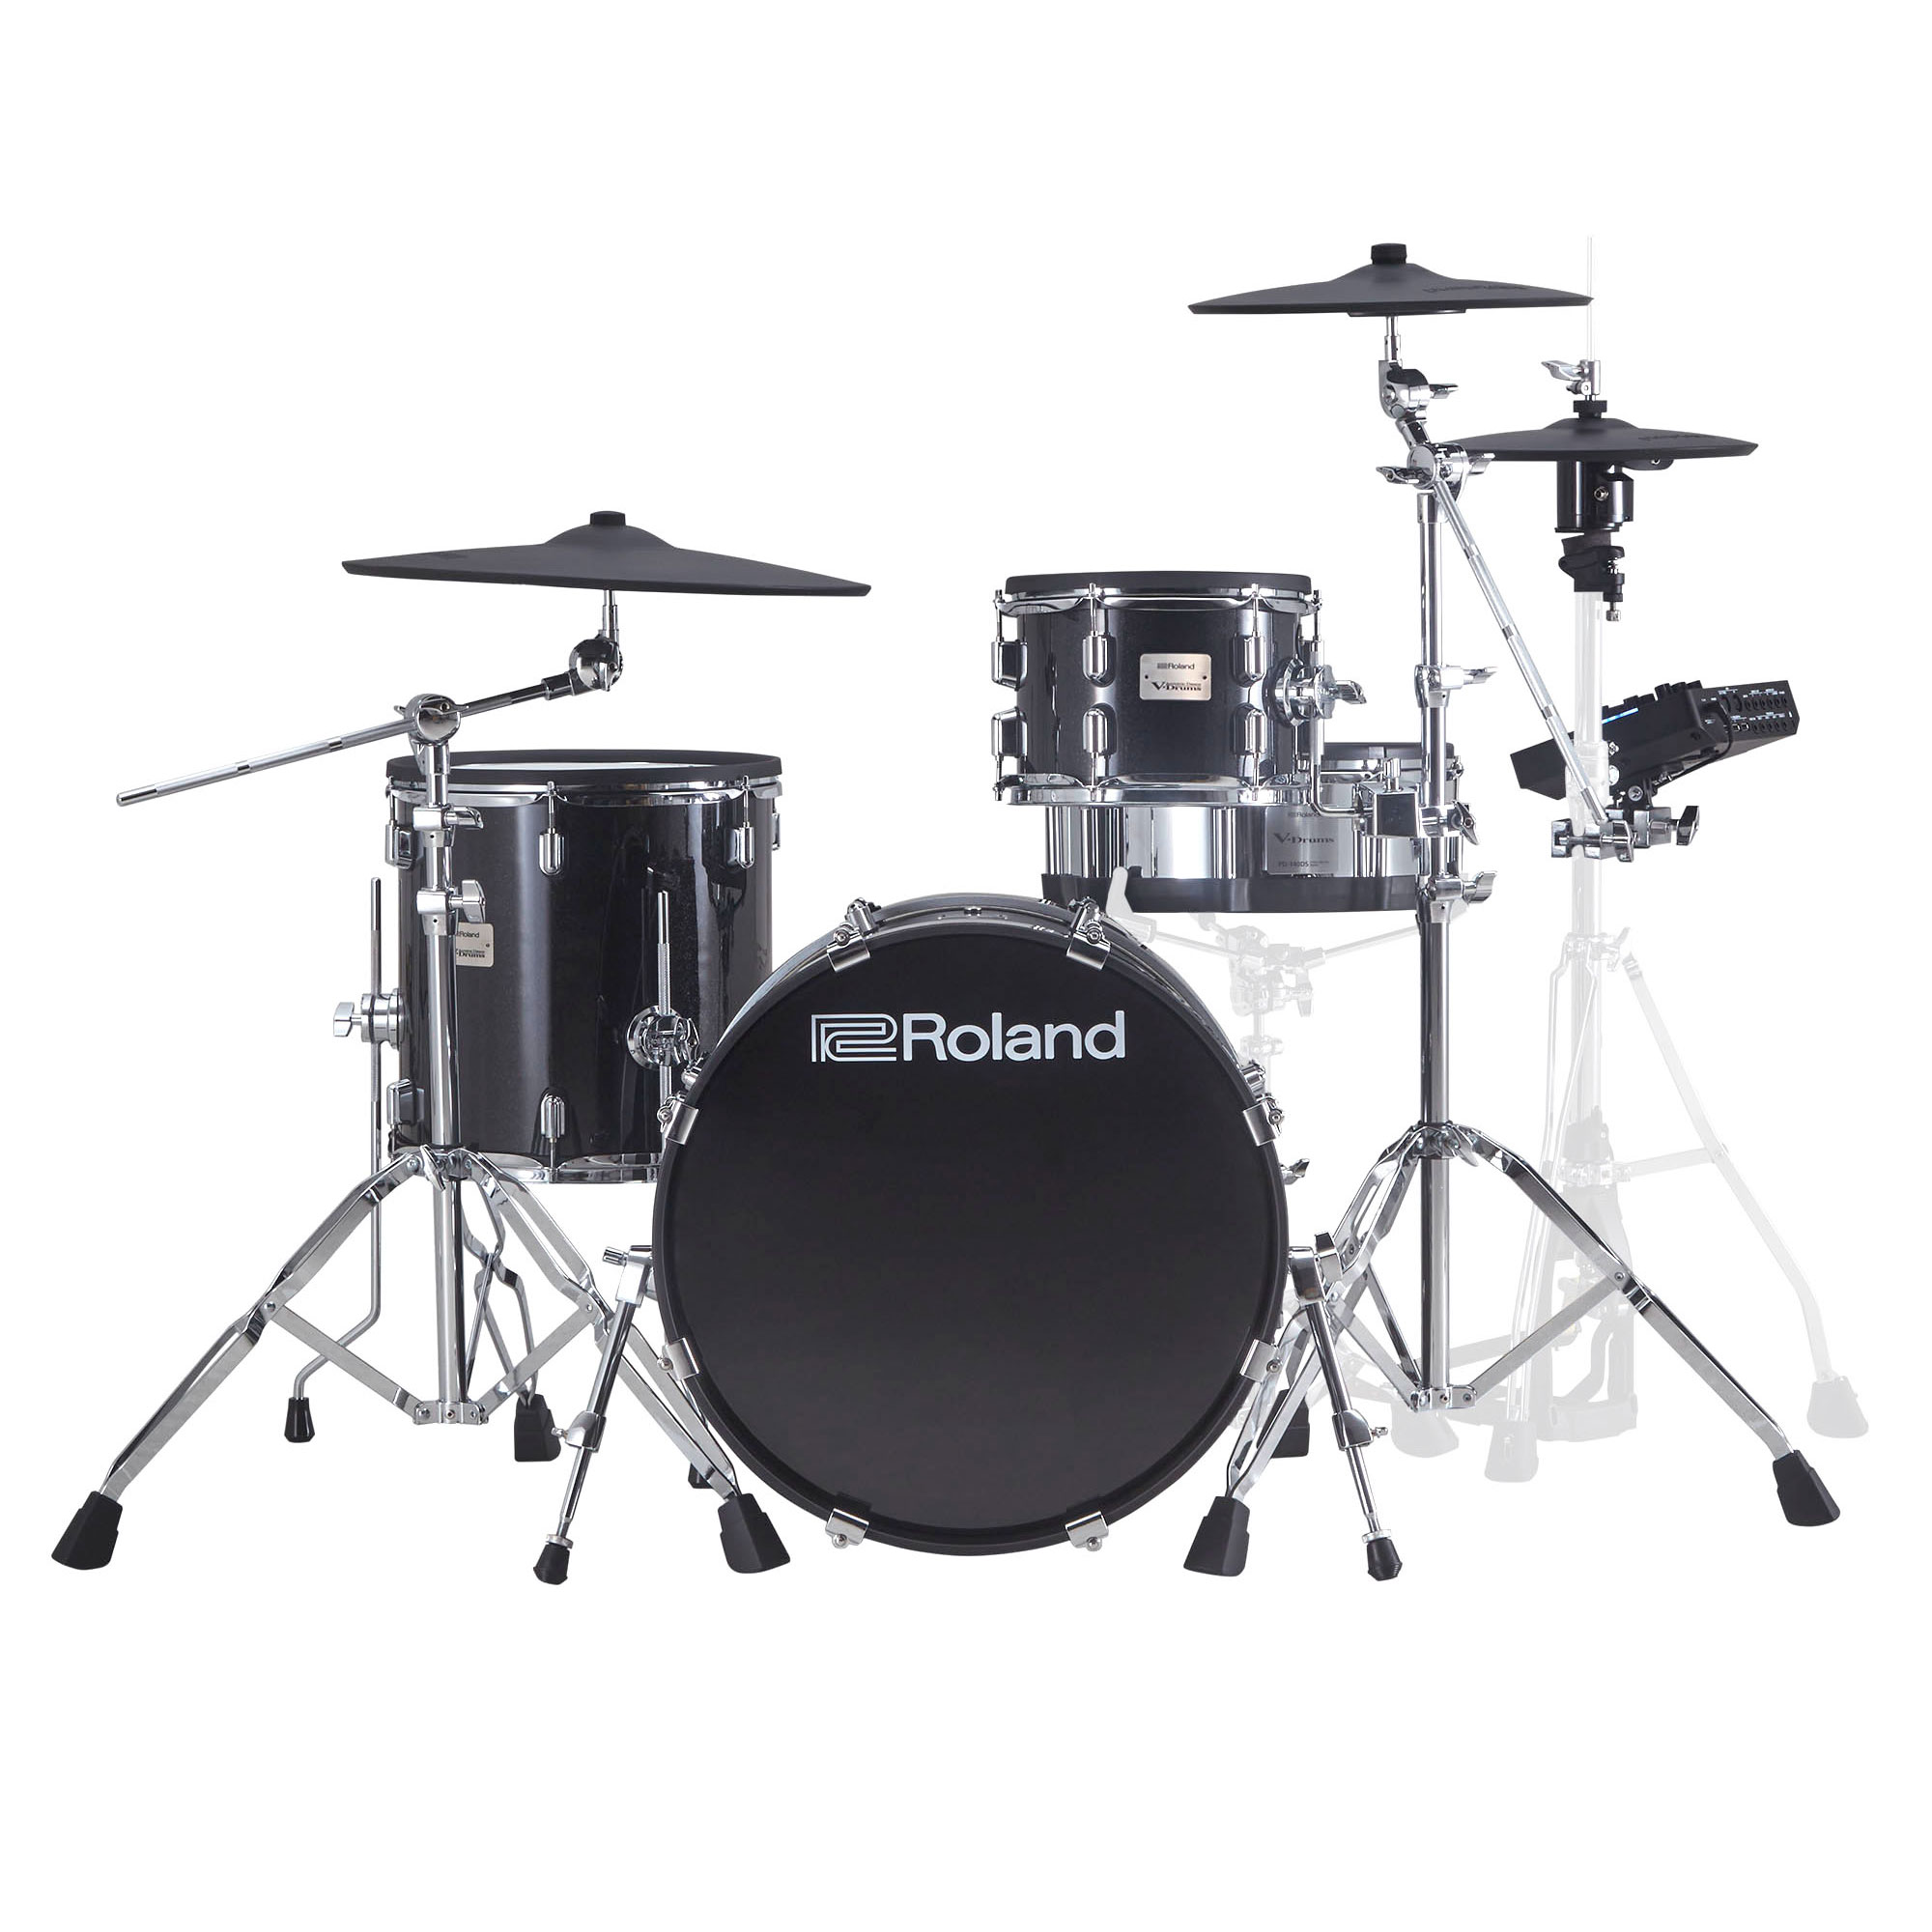 Drum NOT Included Skin Wrap Compatible with Roland PD-128 Drum Baja 0014 Purple